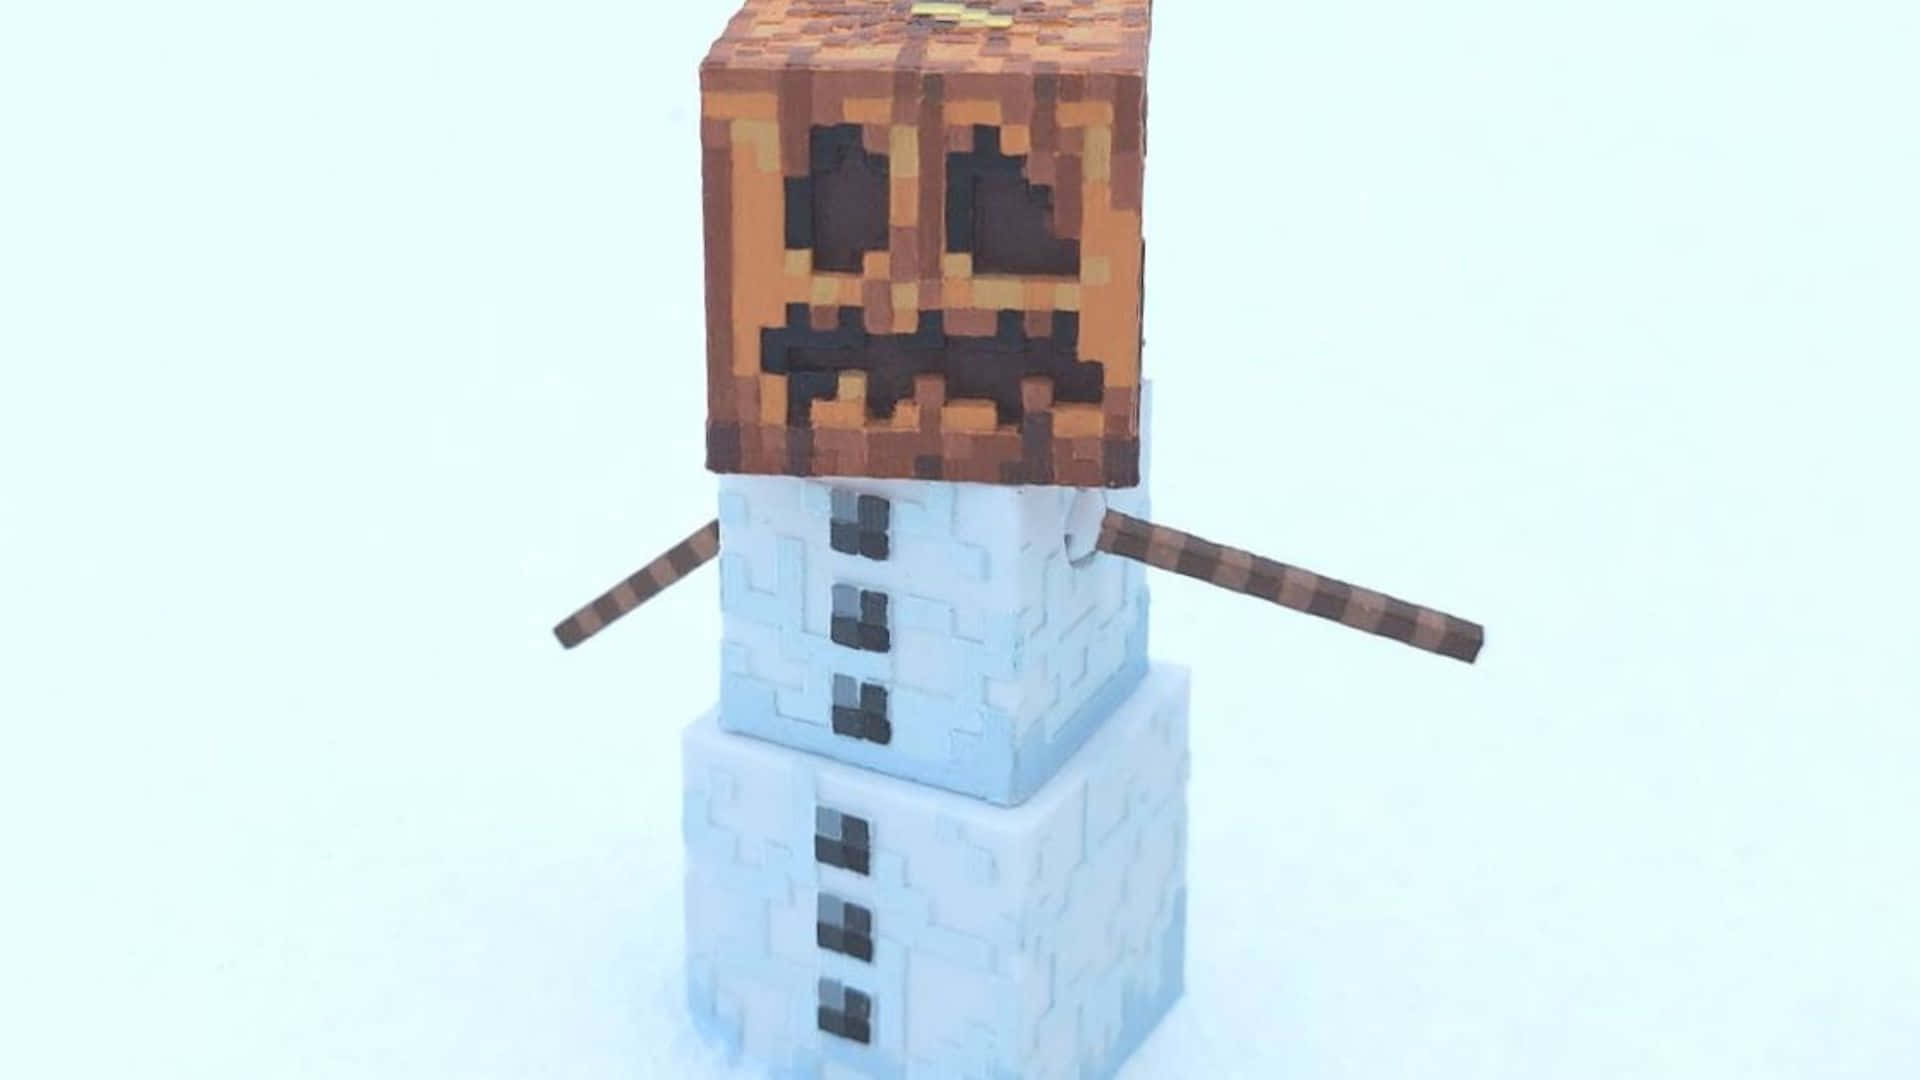 Chilling With A Snow Golem in the Minecraft World Wallpaper